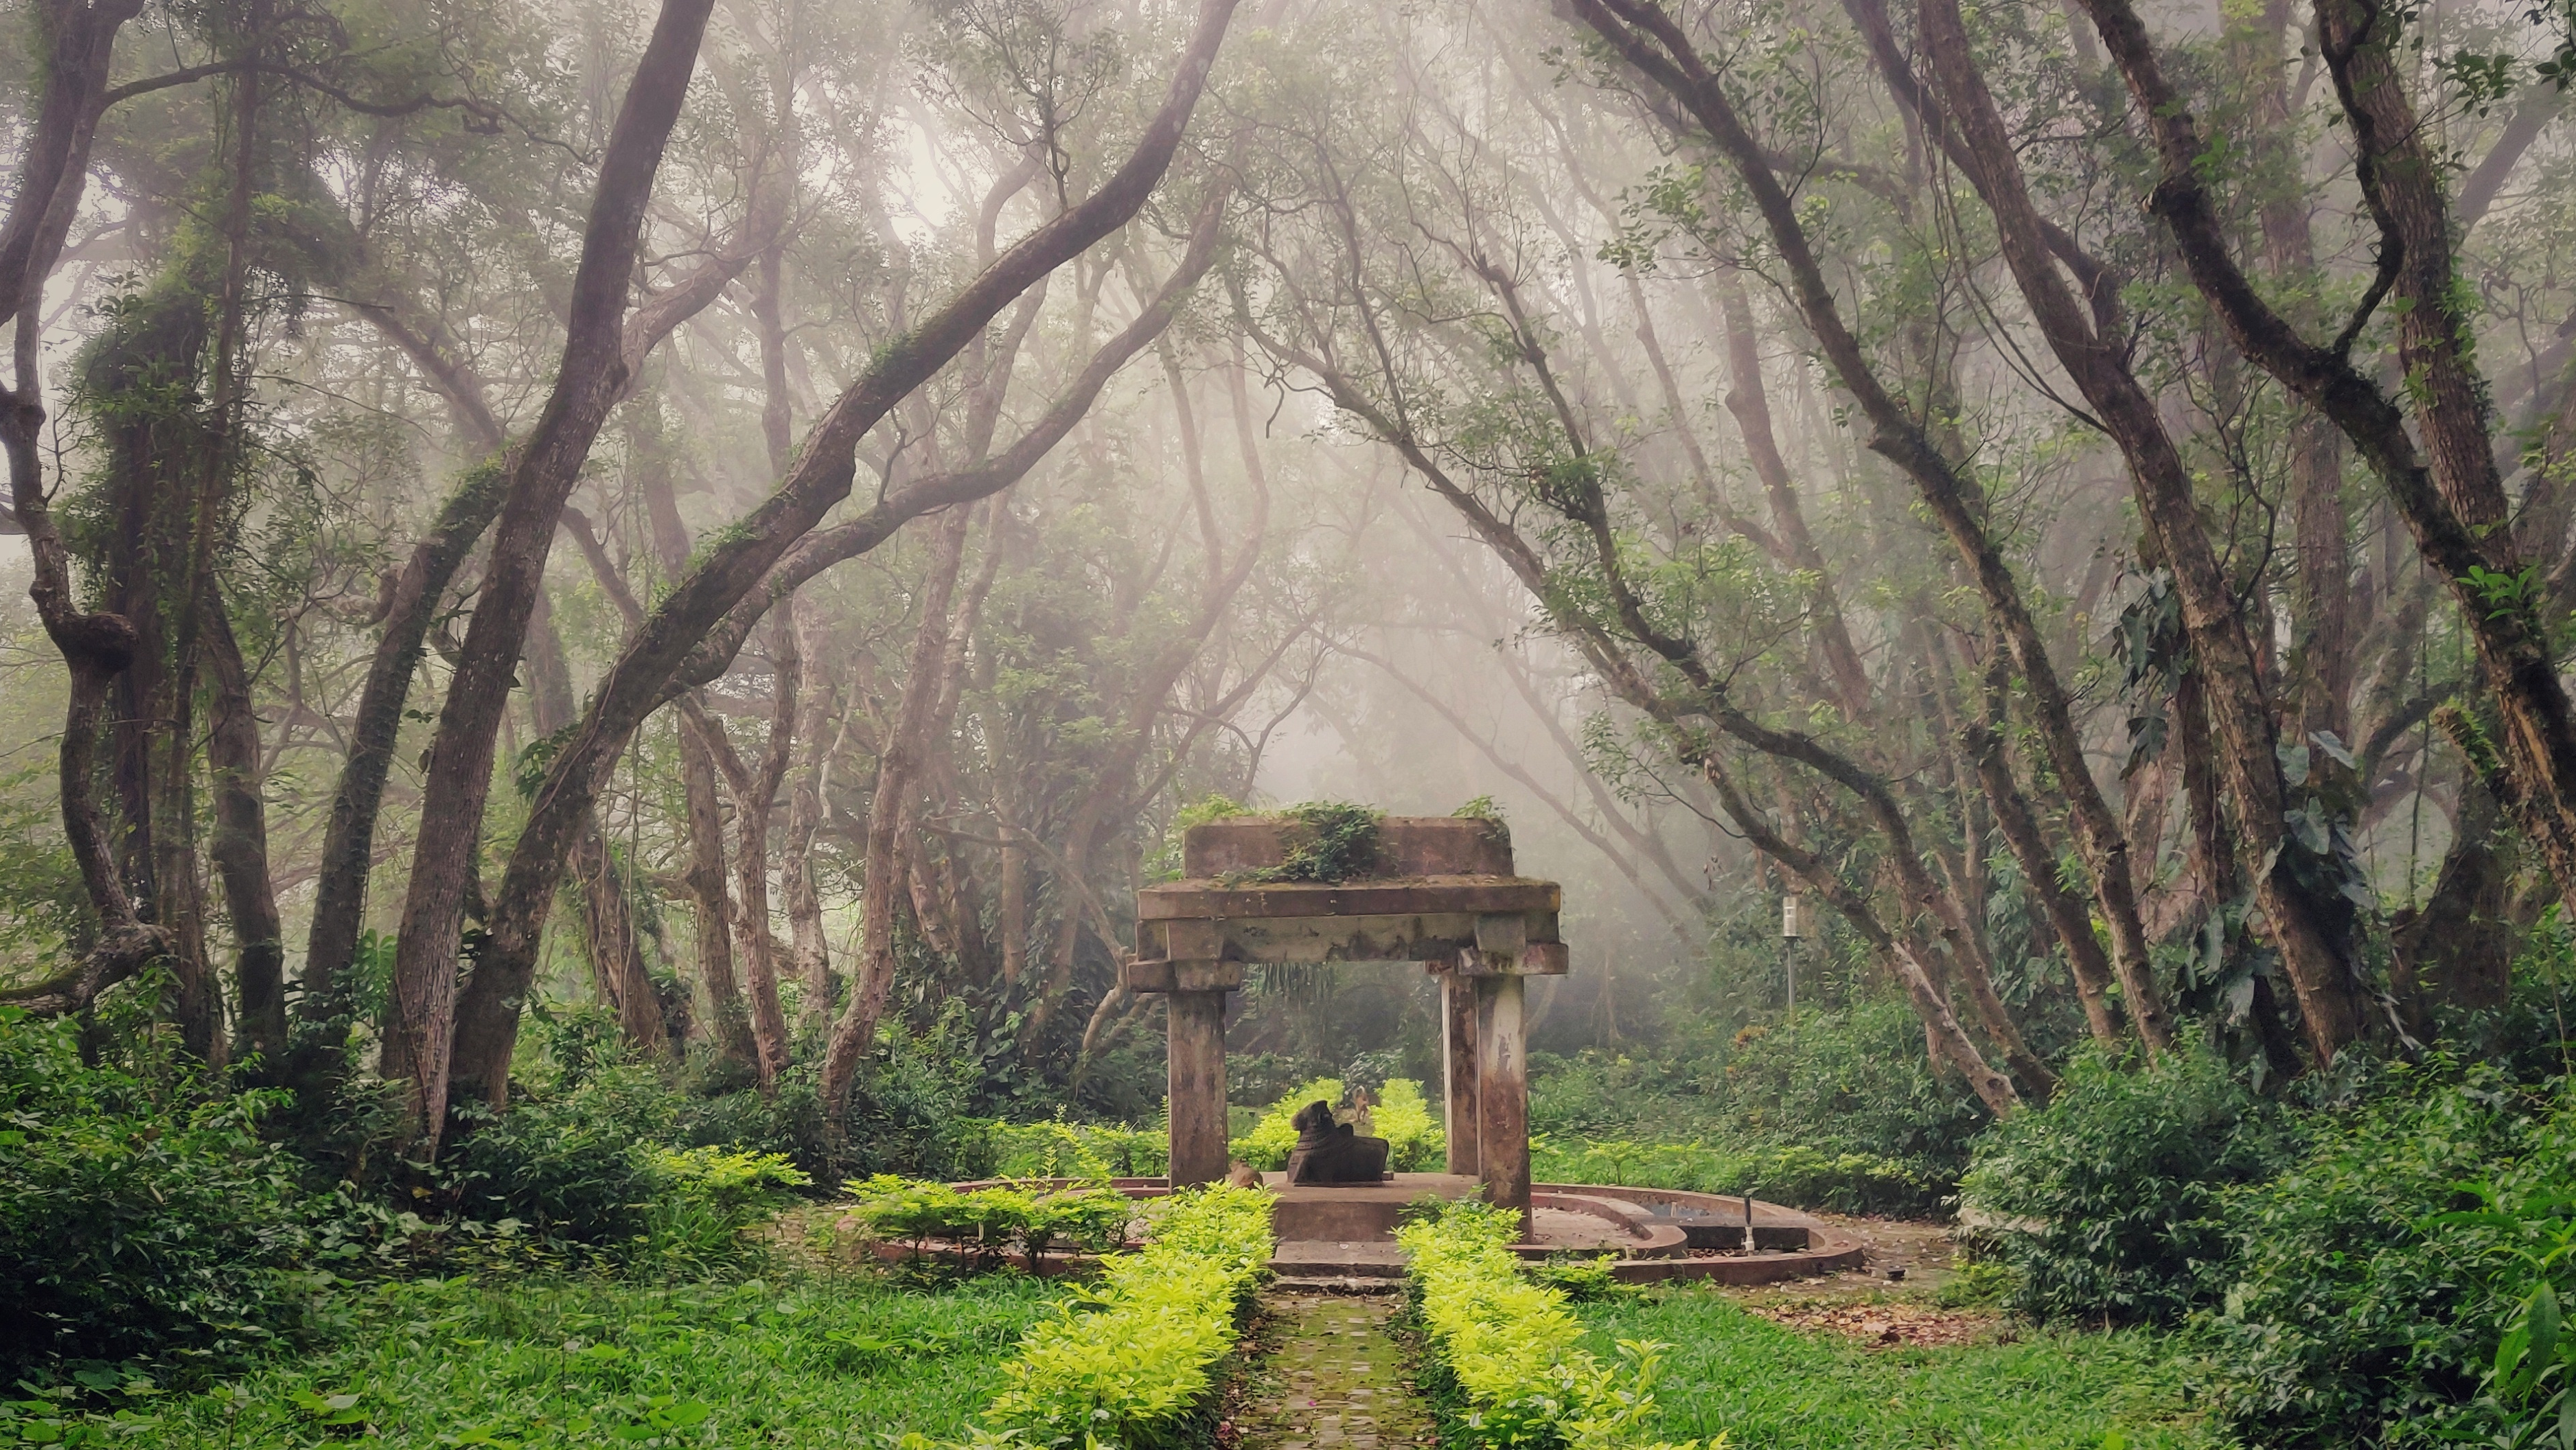 Nandi Hills is a perfect weekend getaway when visiting hill stations near Bangalore